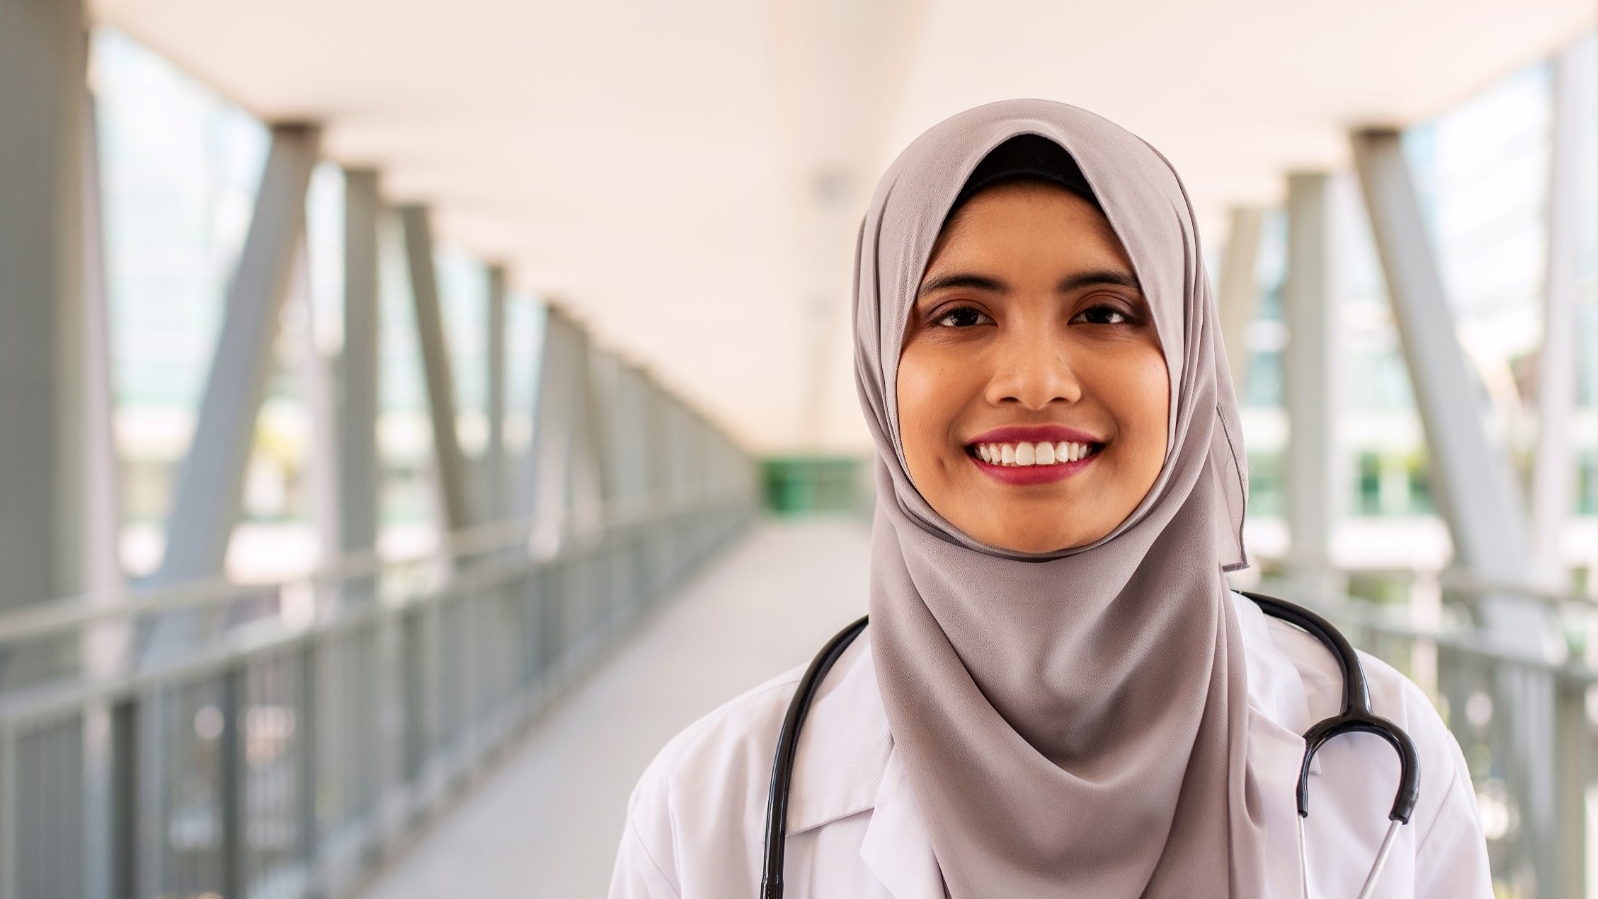 Portrait of confident Muslim doctor wearing hijab standing at the entrance of hospital, photo by gahsoon/Getty Images